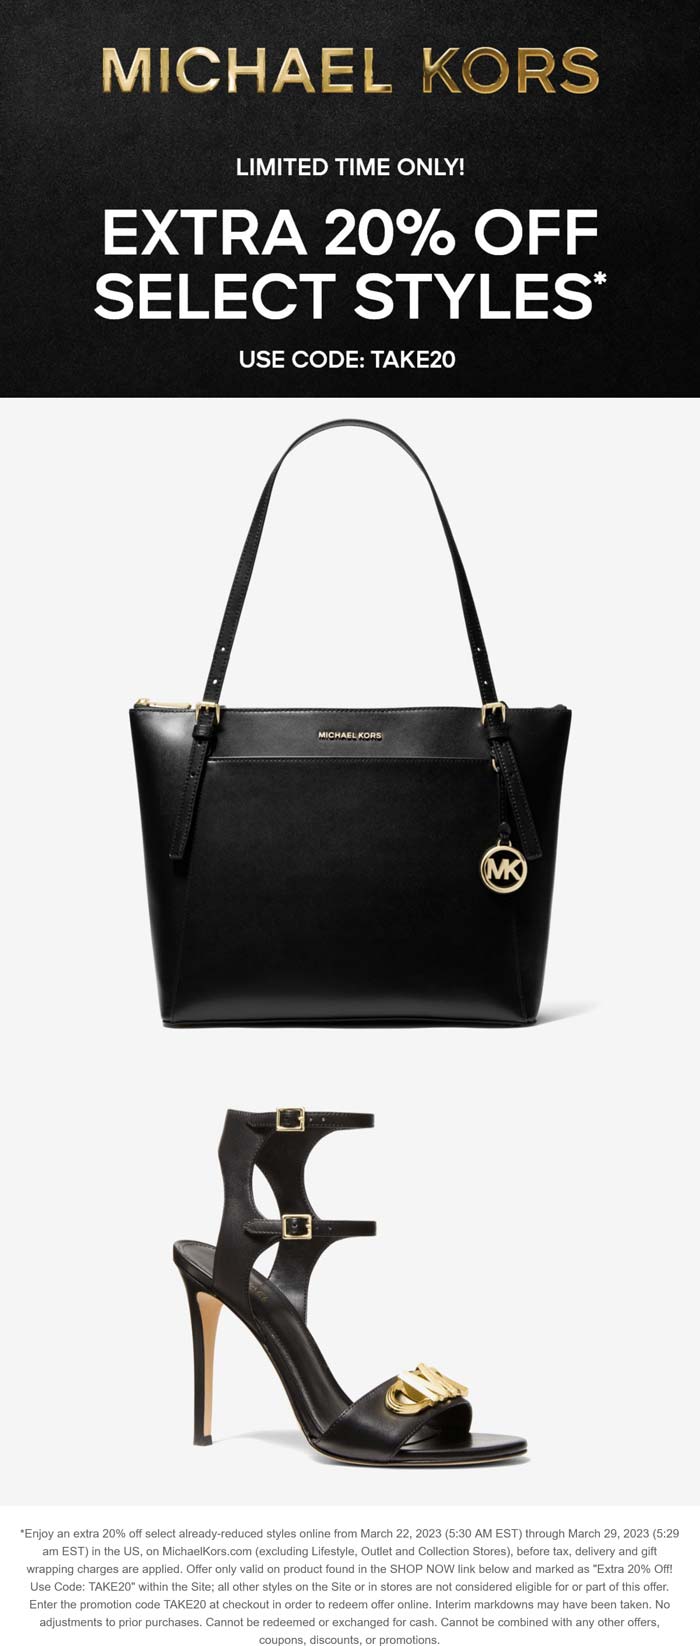 Michael Kors stores Coupon  Extra 20% off sale styles online at Michael Kors via promo code TAKE20 #michaelkors 